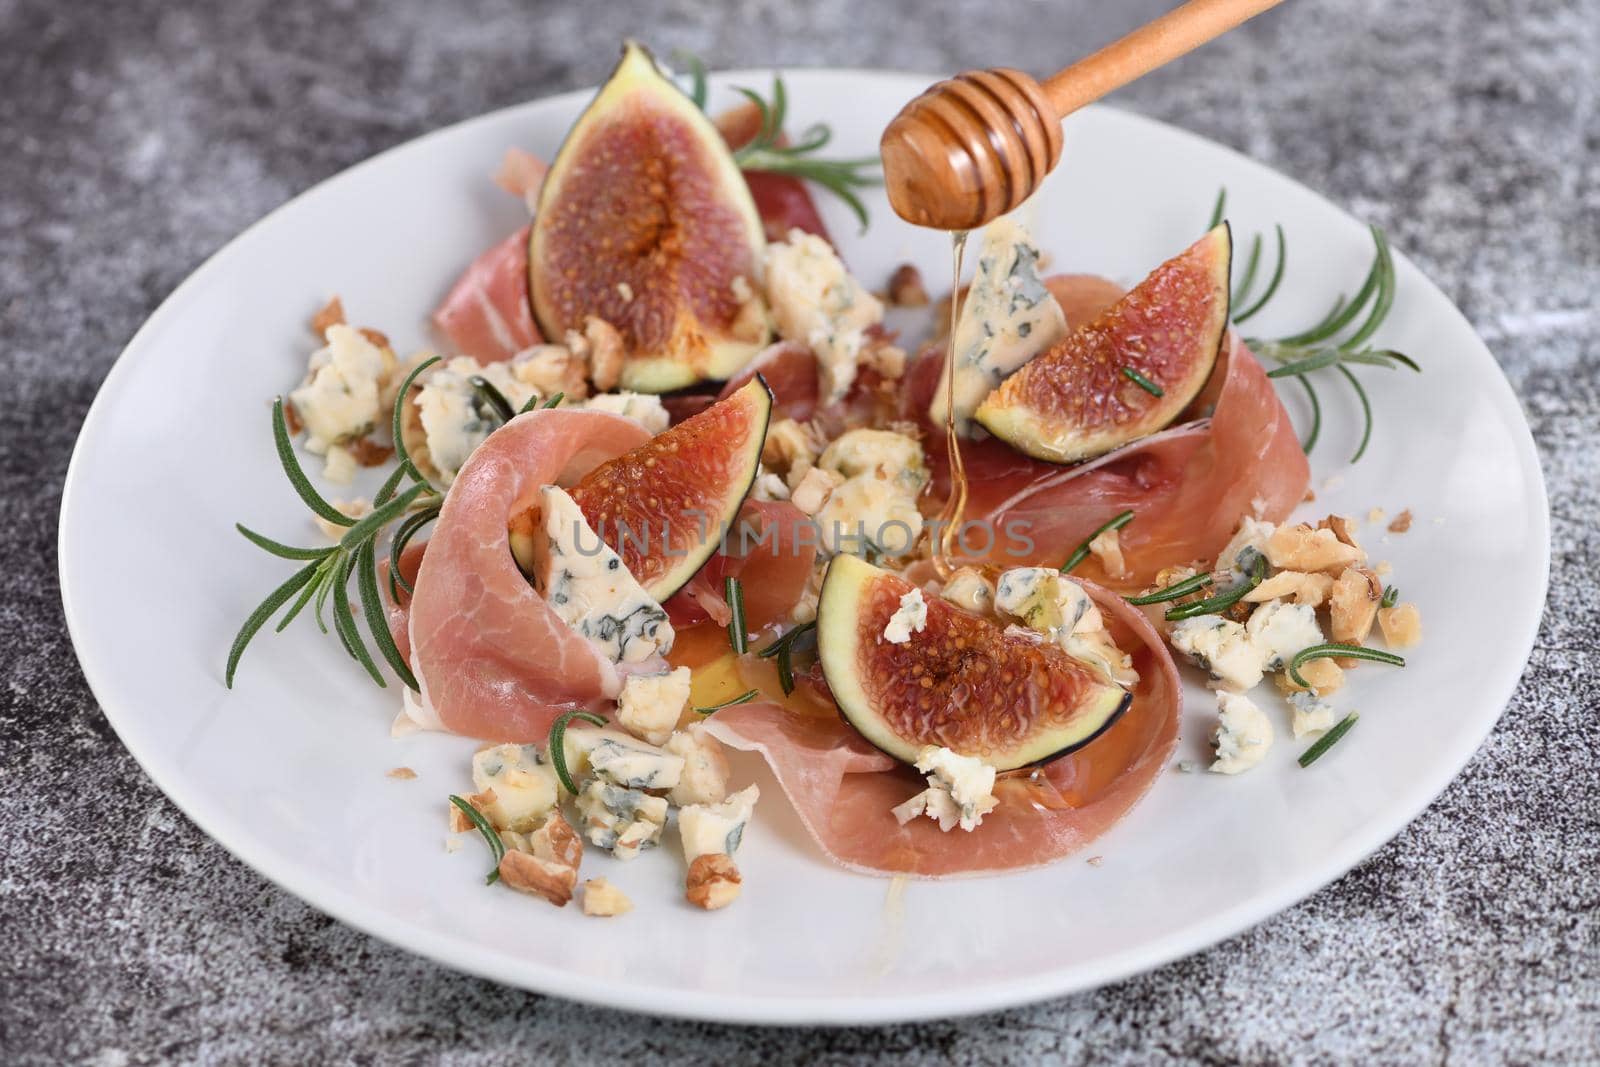 Figs with Parma ham by Apolonia